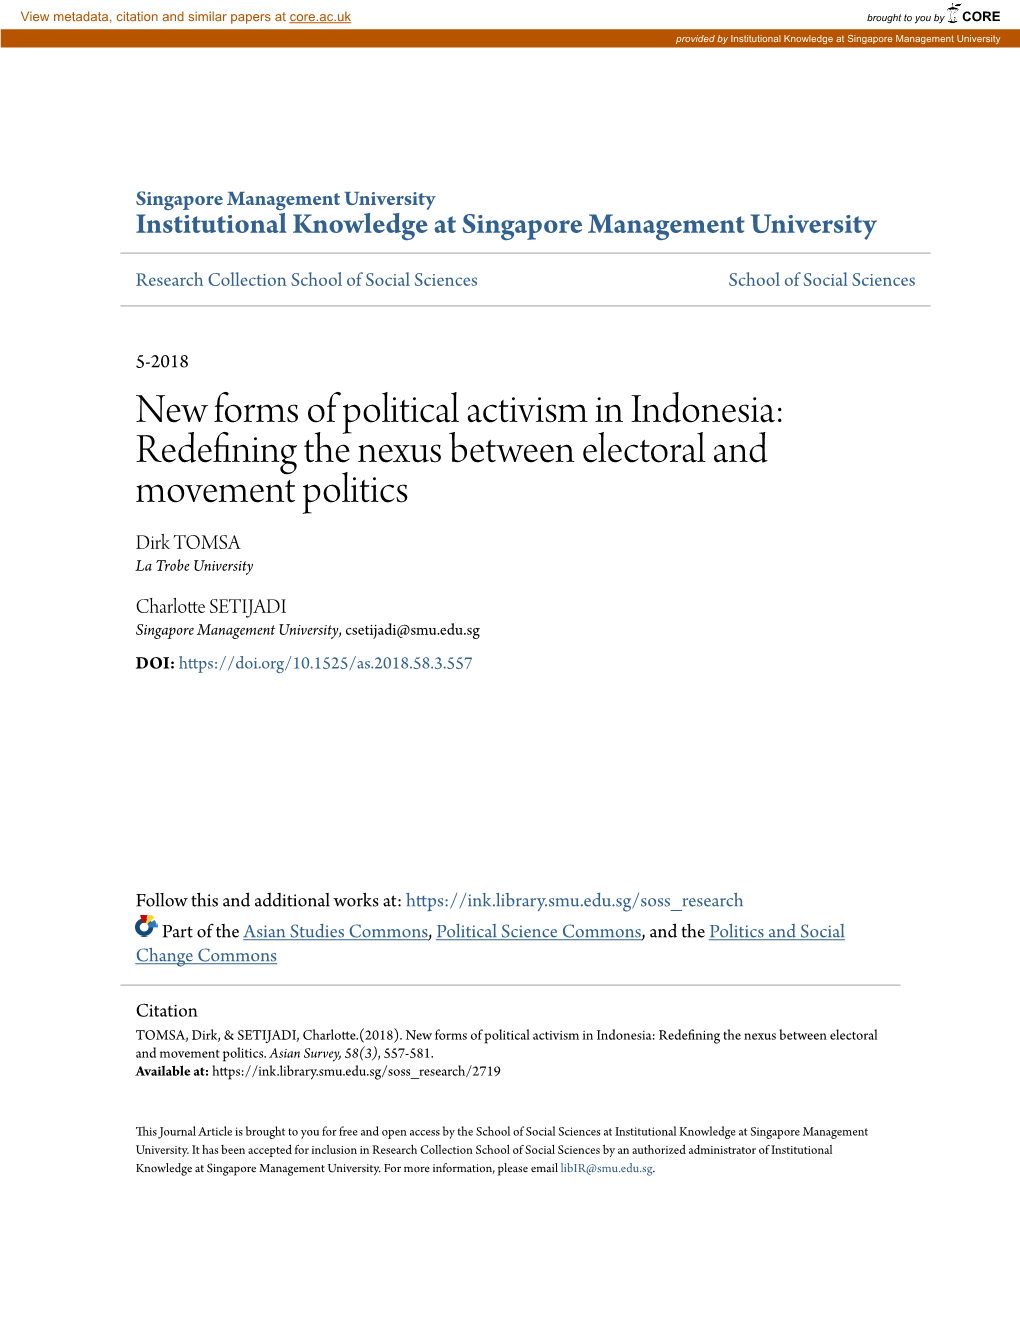 New Forms of Political Activism in Indonesia: Redefining the Nexus Between Electoral and Movement Politics Dirk TOMSA La Trobe University